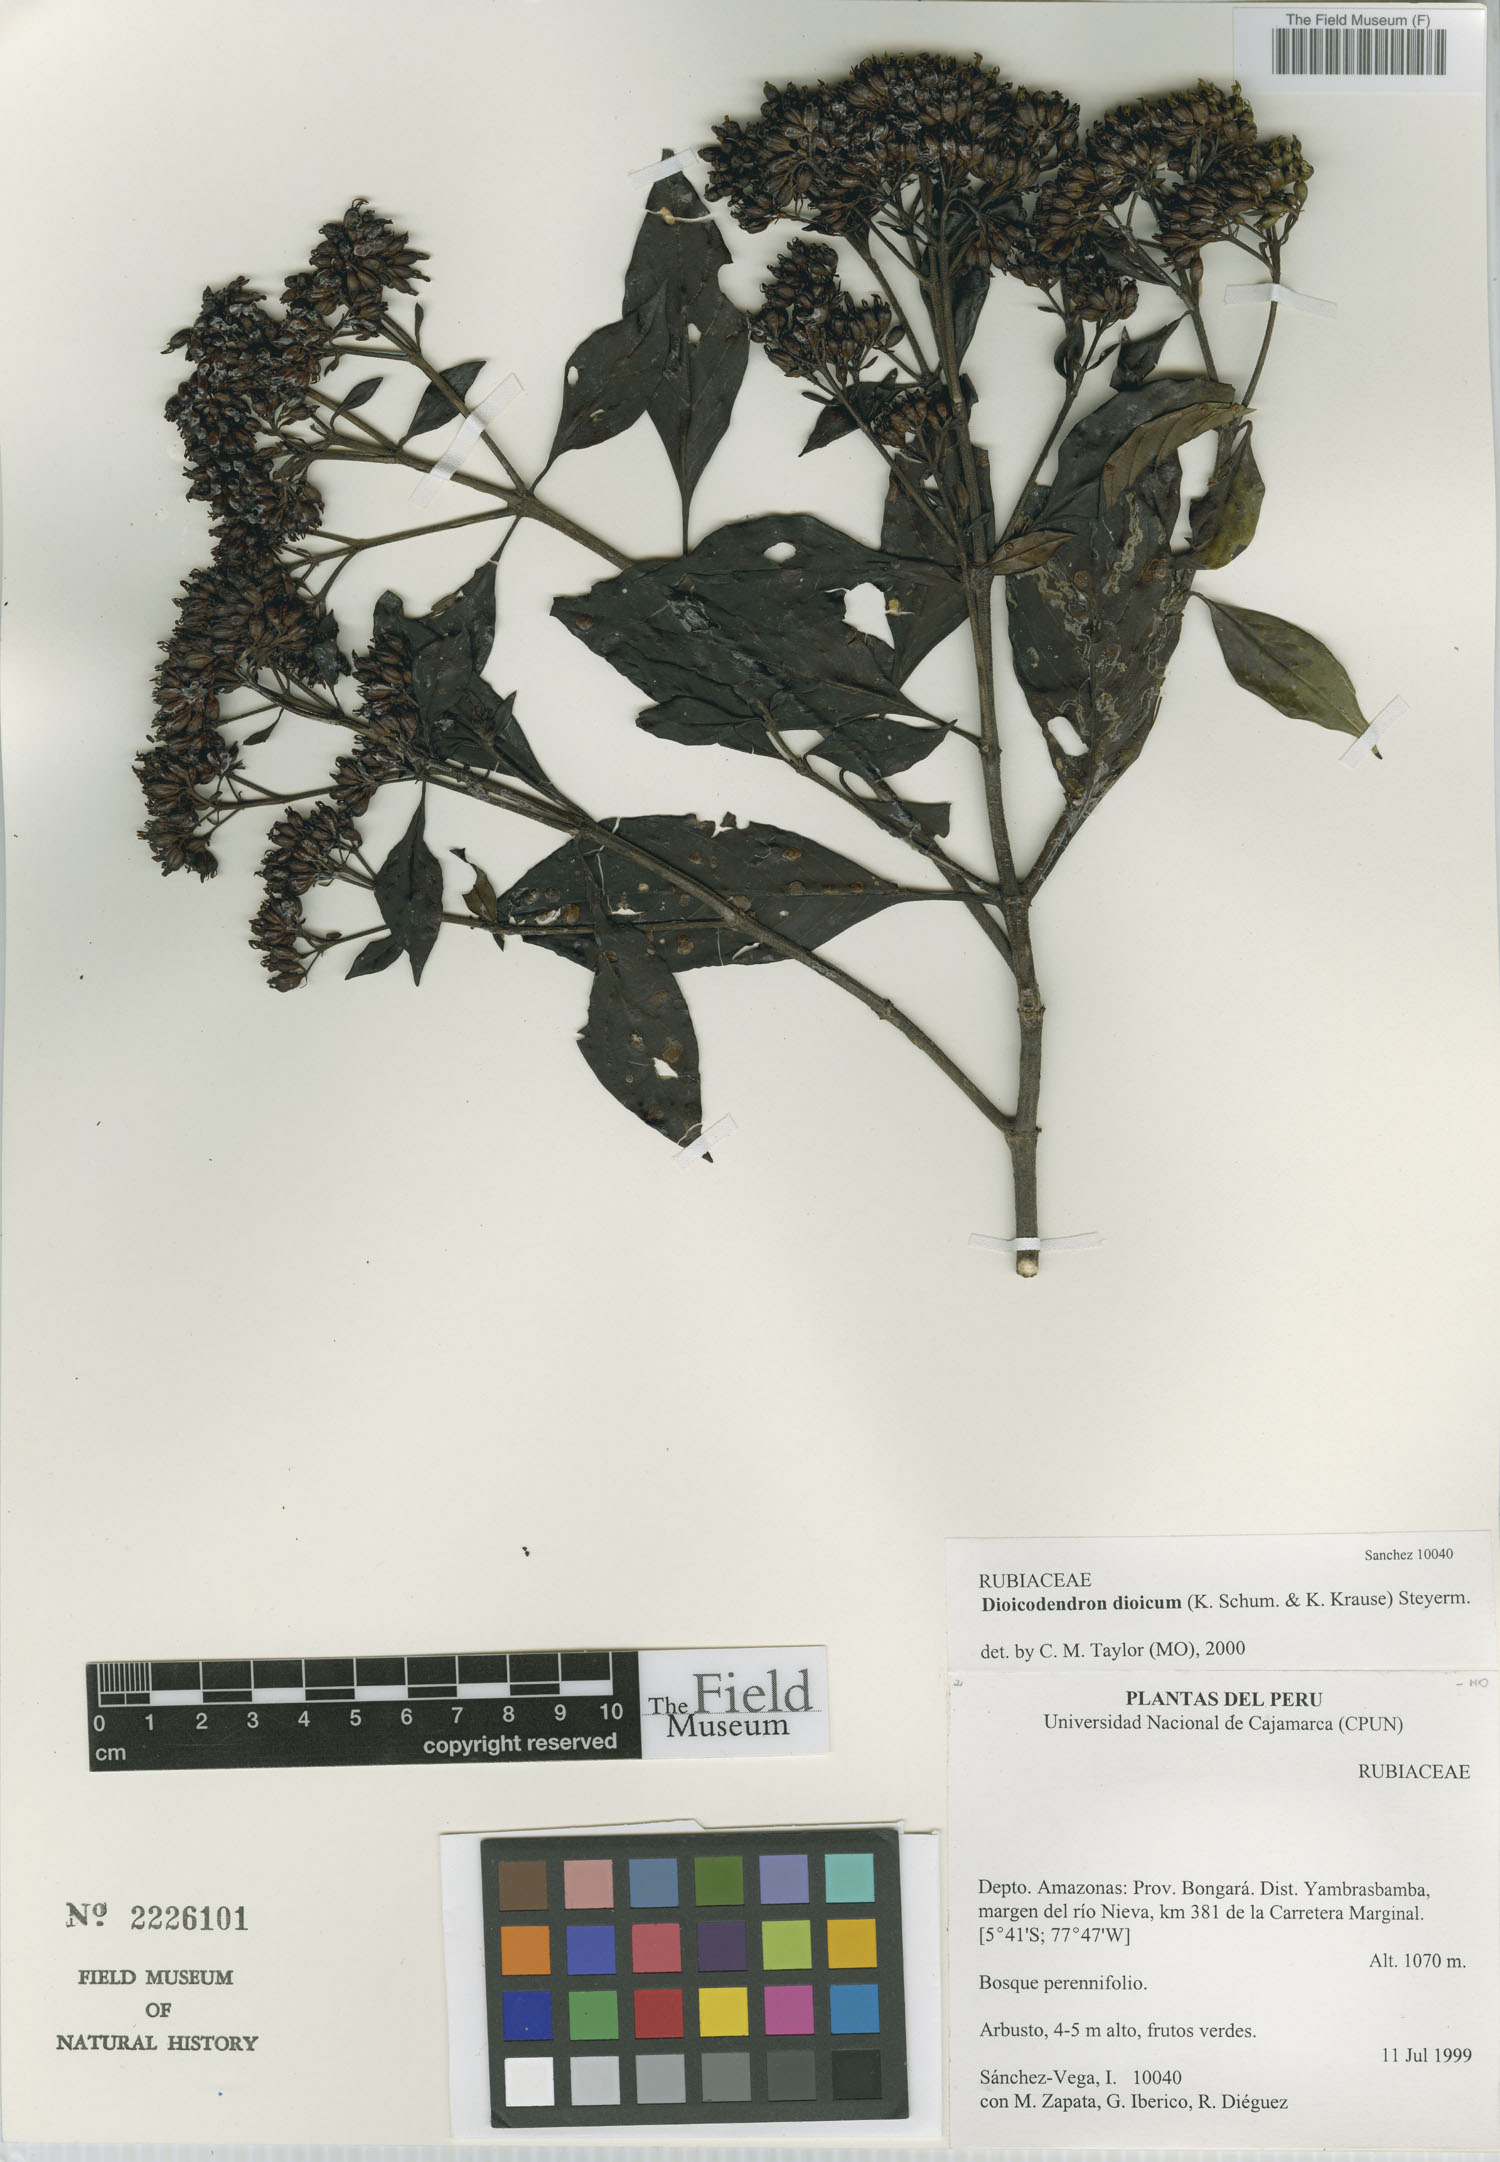 Dioicodendron image